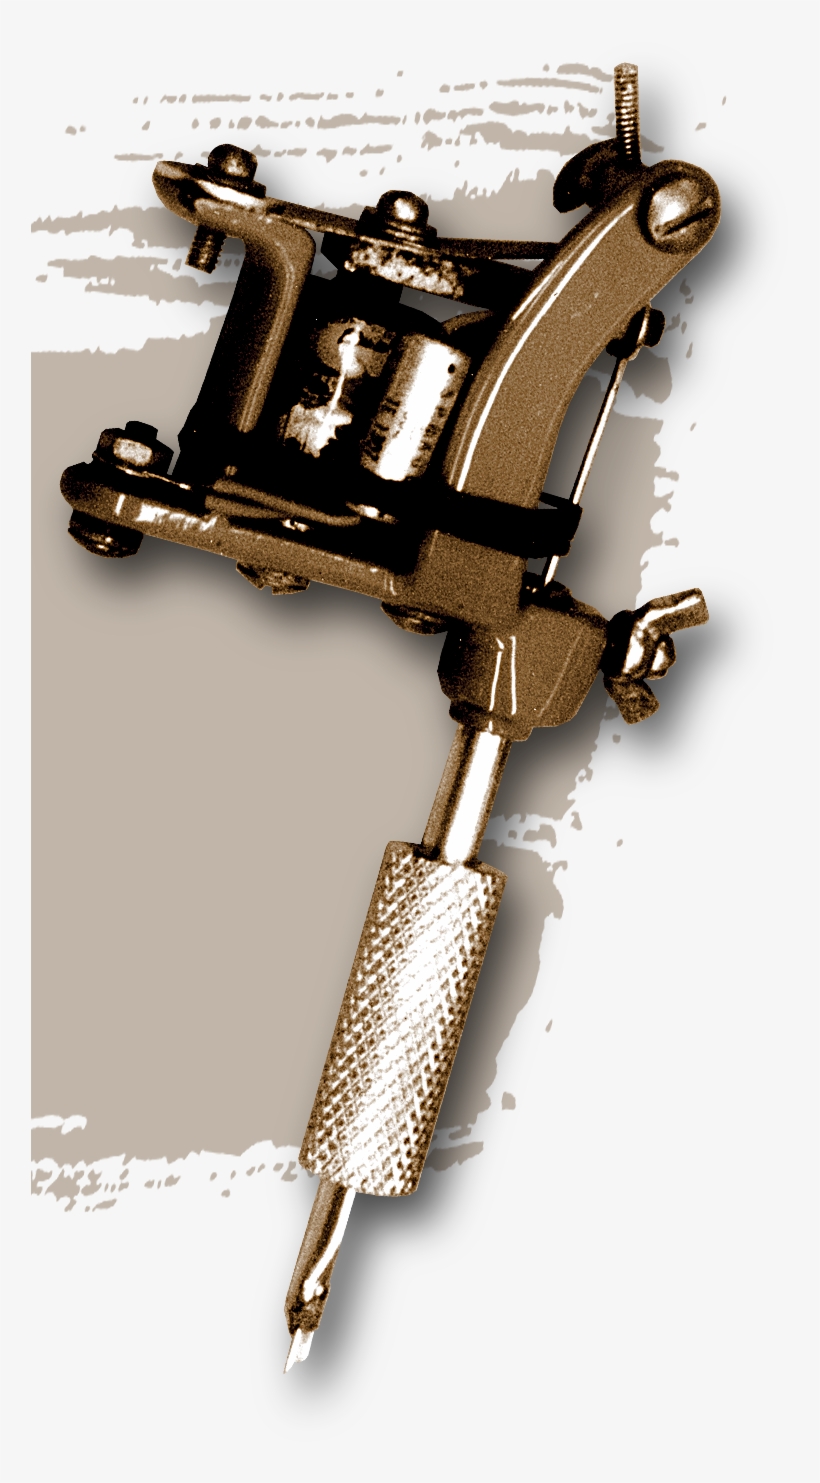 I Build Machines - Bicycle Pedal, transparent png #1157792